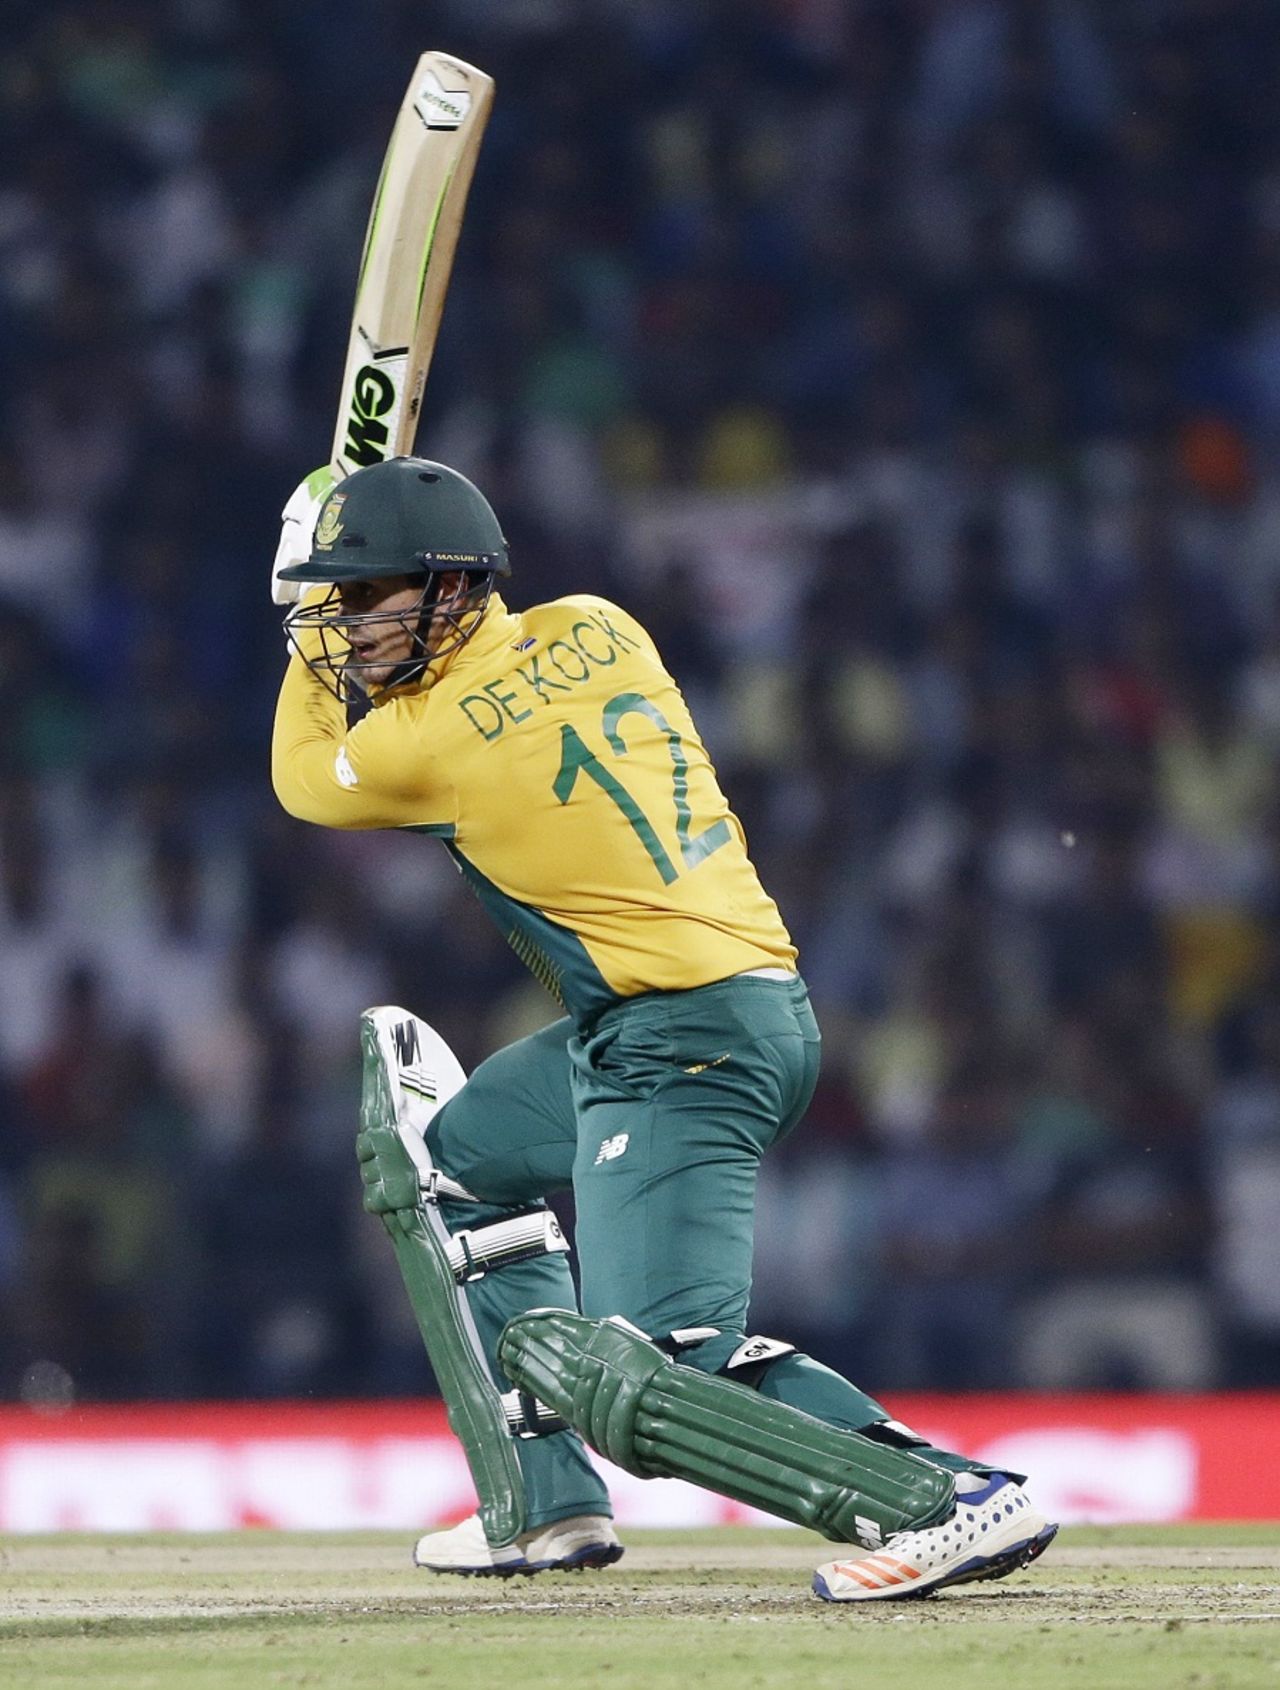 Quinton de Kock drives through the off side, South Africa v West Indies, World T20 2016, Group 1, Nagpur, March 25, 2016